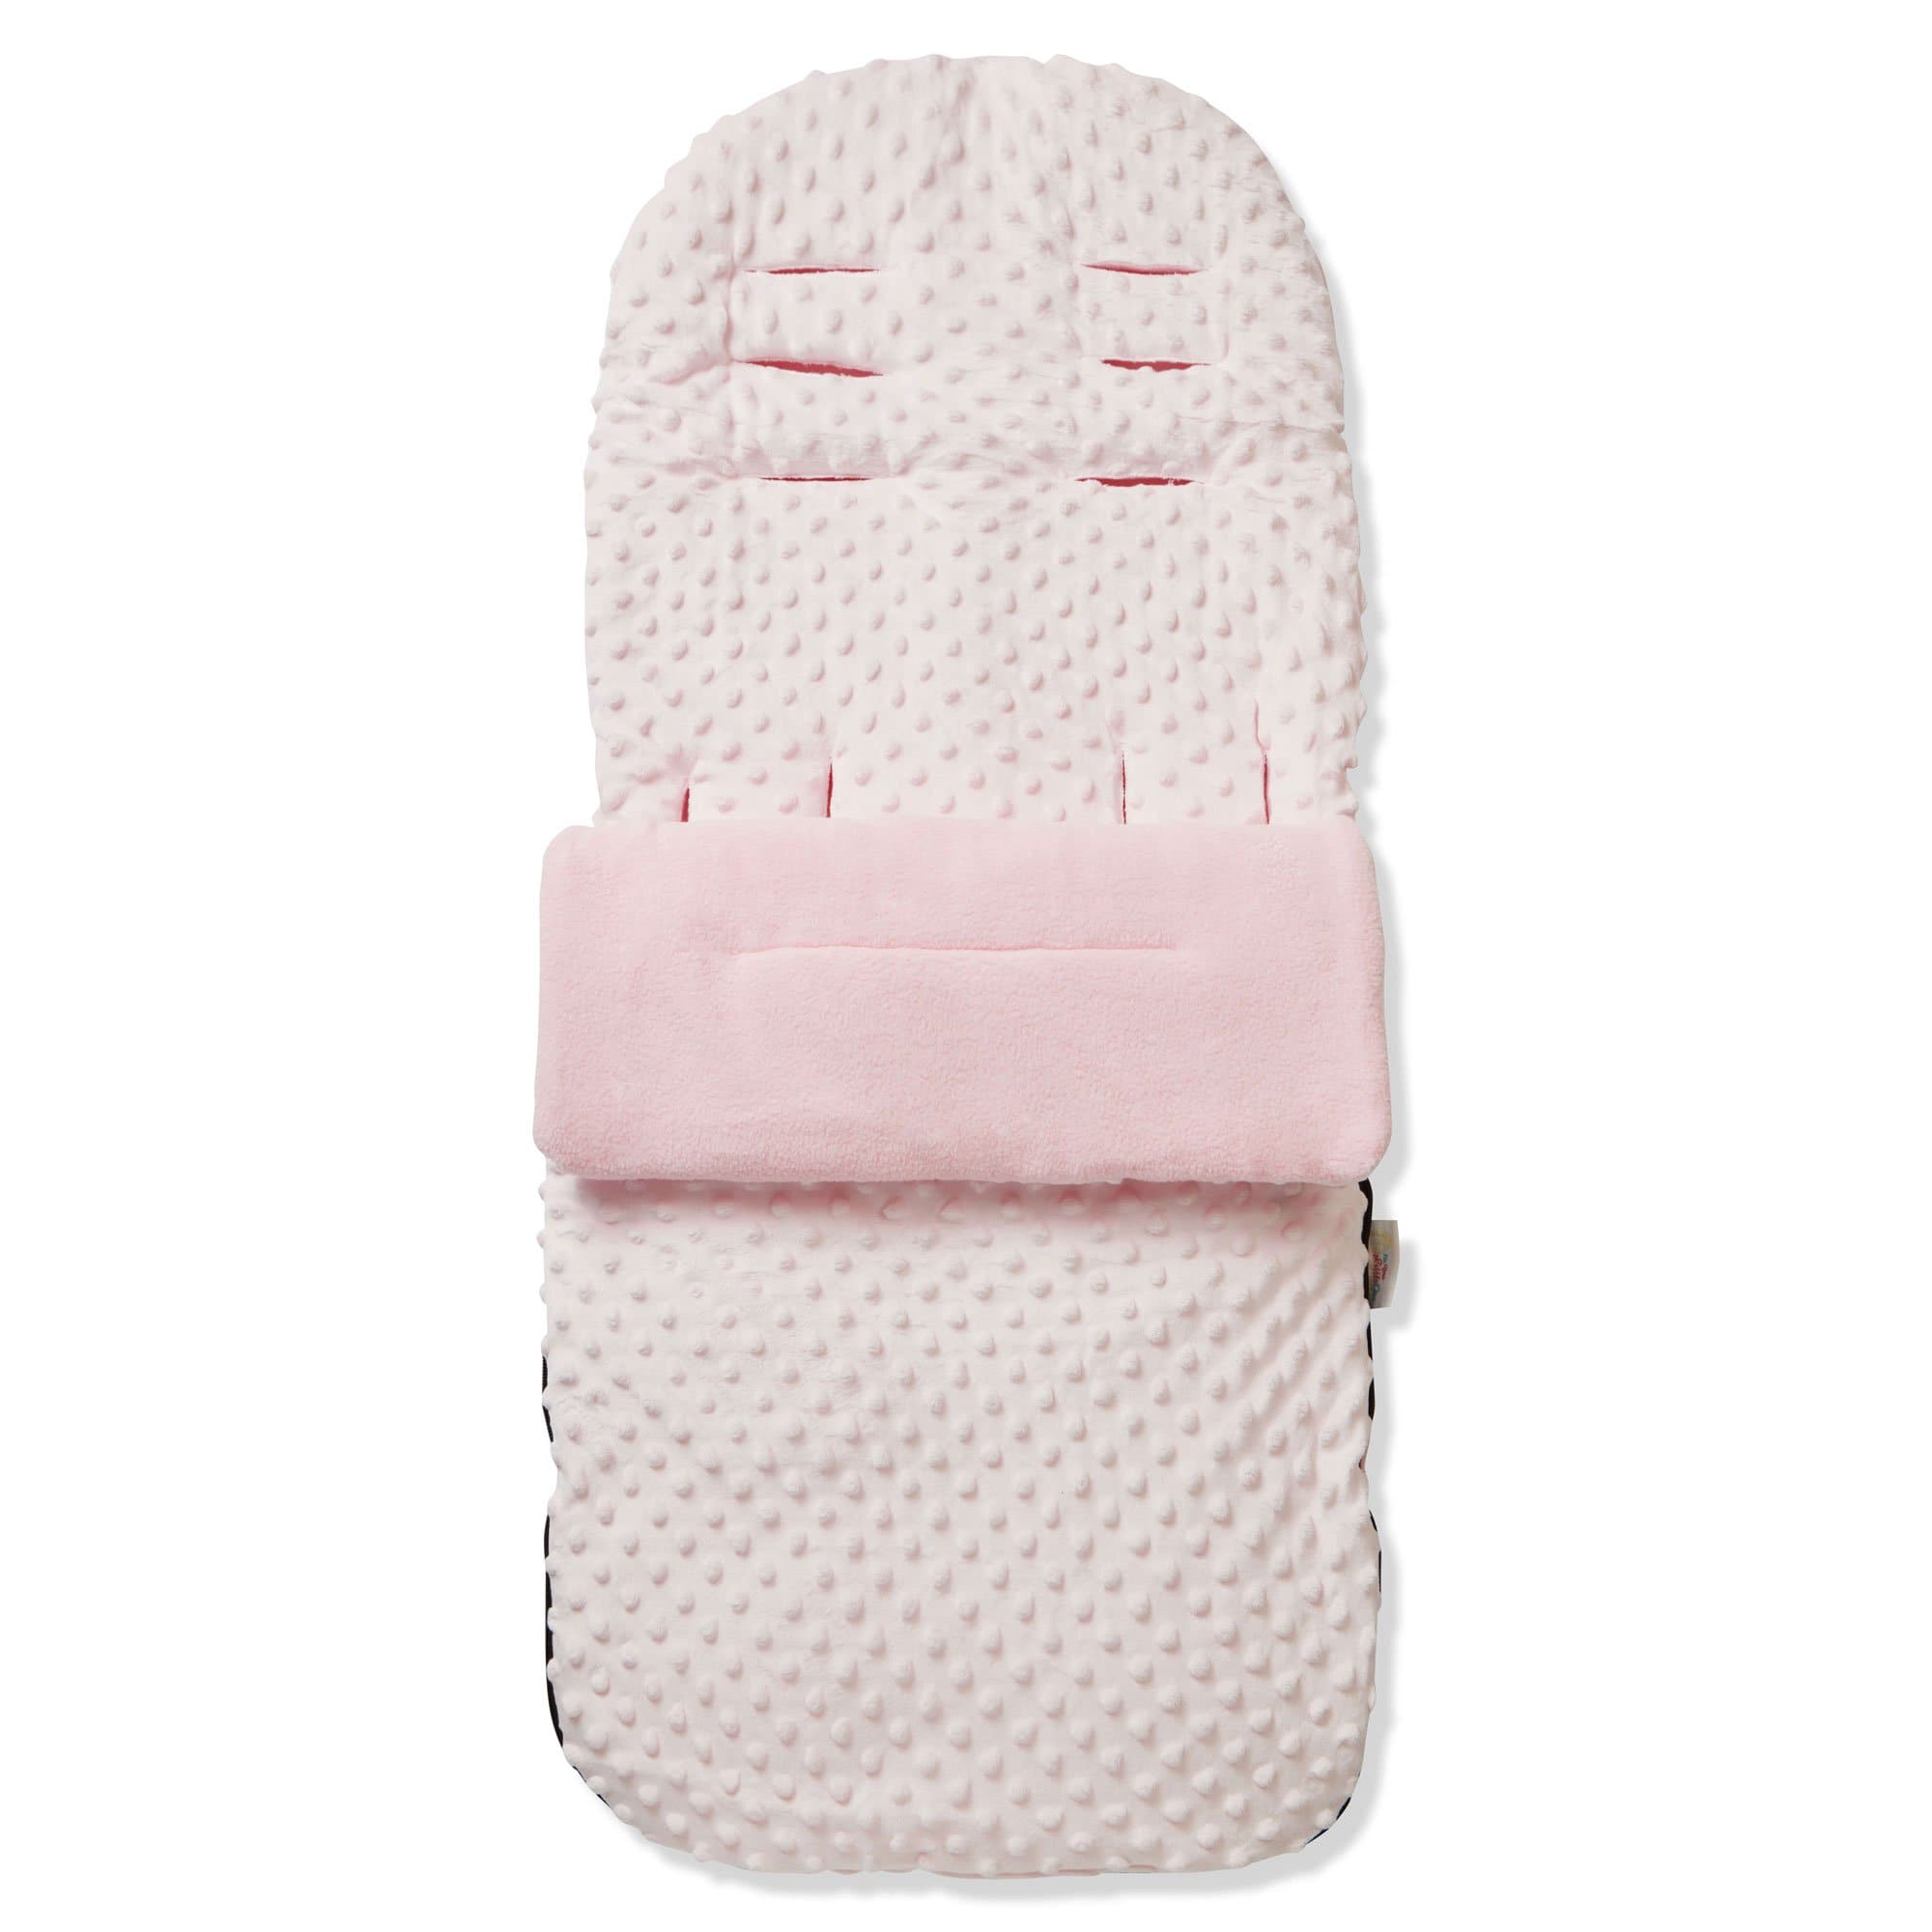 Dimple Footmuff / Cosy Toes Compatible with Noukies - For Your Little One